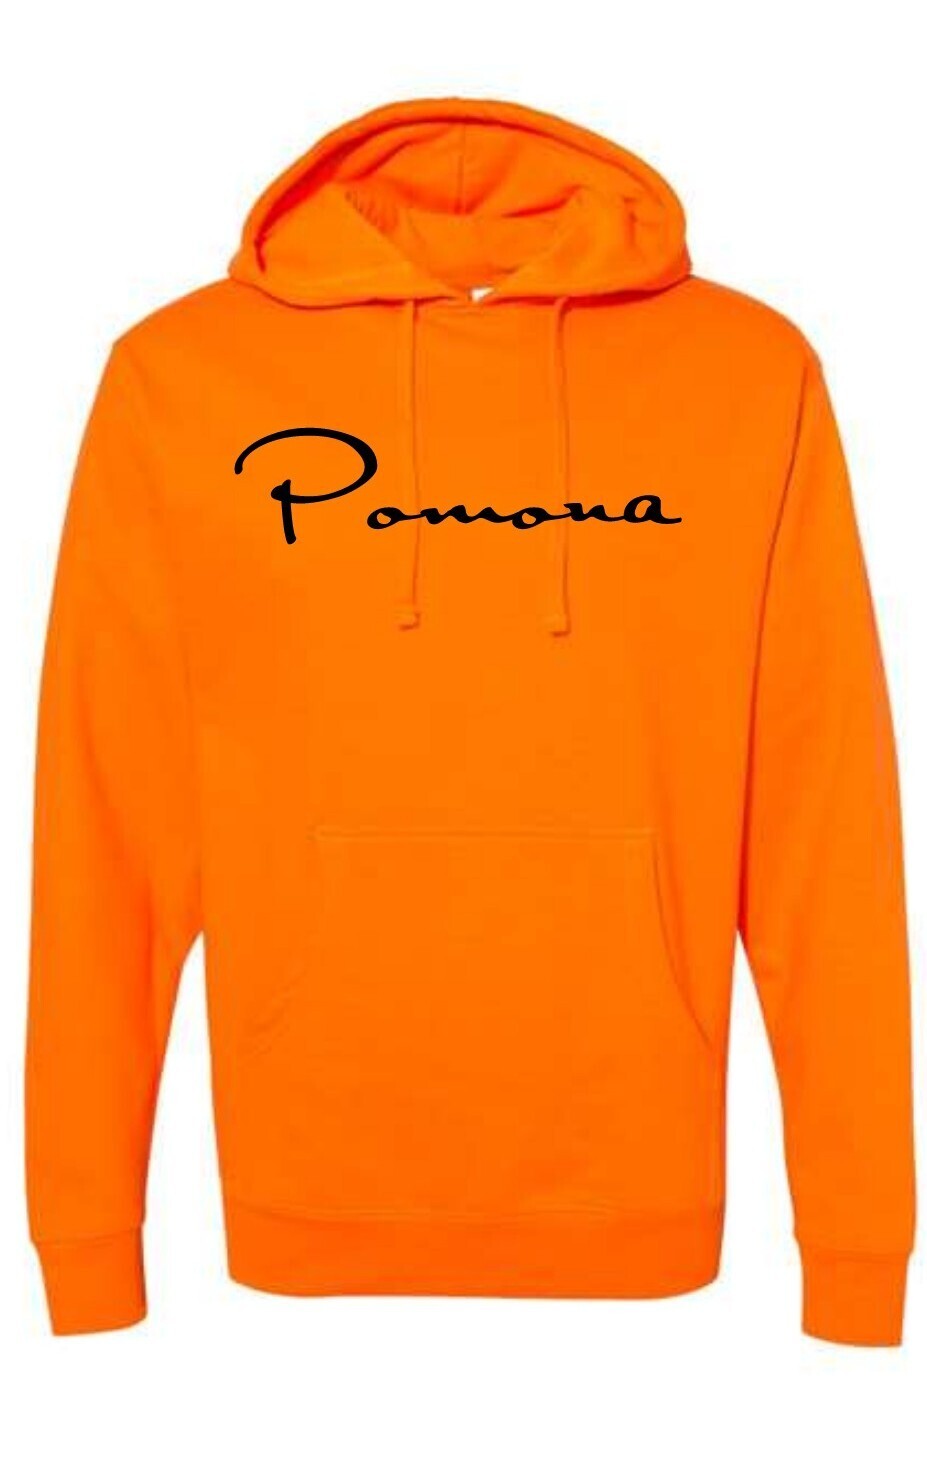 OG PTOWN ORANGE SIGNATURE HOODIE
Shipping included